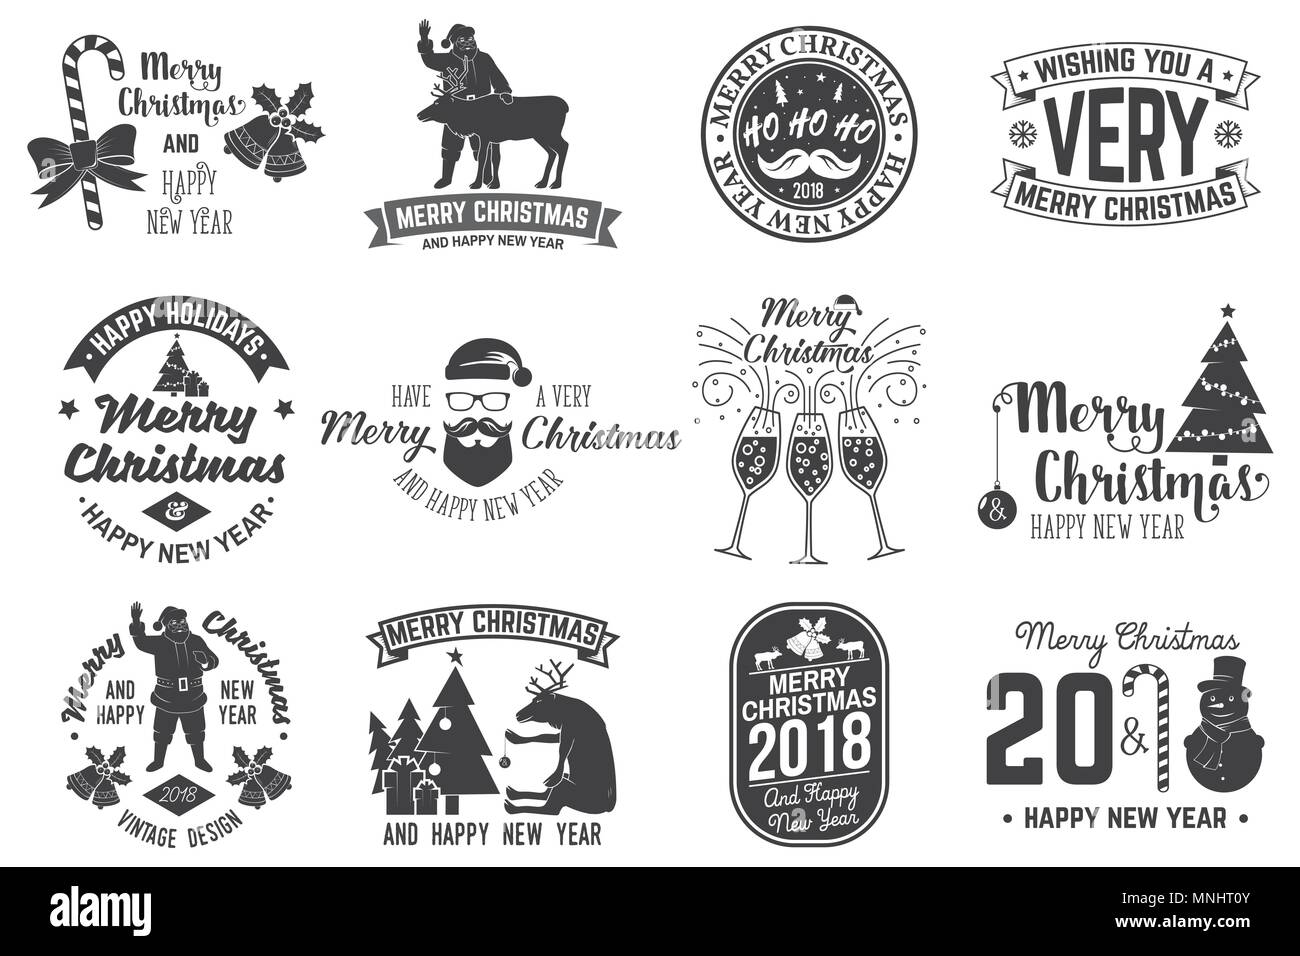 Merry Christmas and Happy New Year 2018 retro template with Santa Claus, Christmas tree, gifts and reindeer. Vector illustration. Xmas design for cong Stock Vector